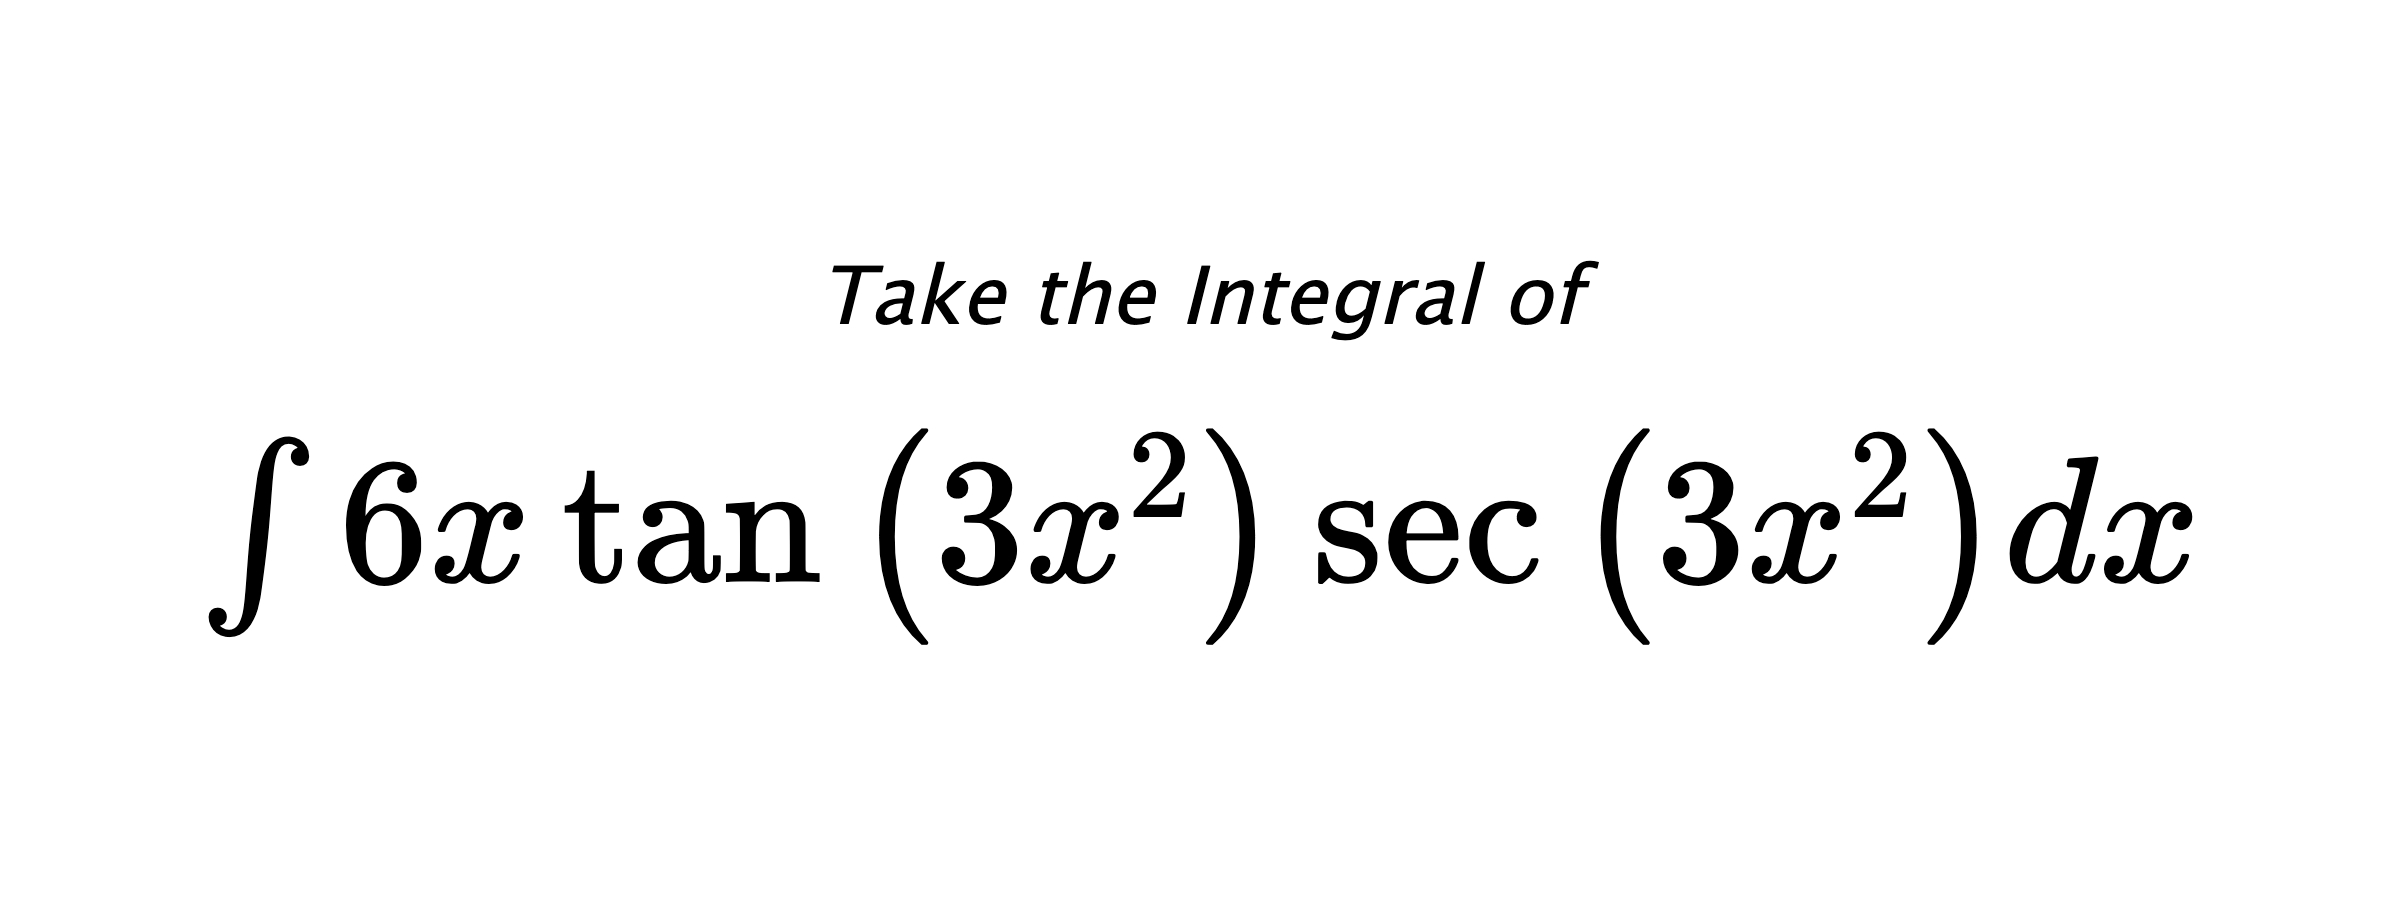 Take the Integral of $ \int 6 x \tan{\left(3 x^{2} \right)} \sec{\left(3 x^{2} \right)} dx $